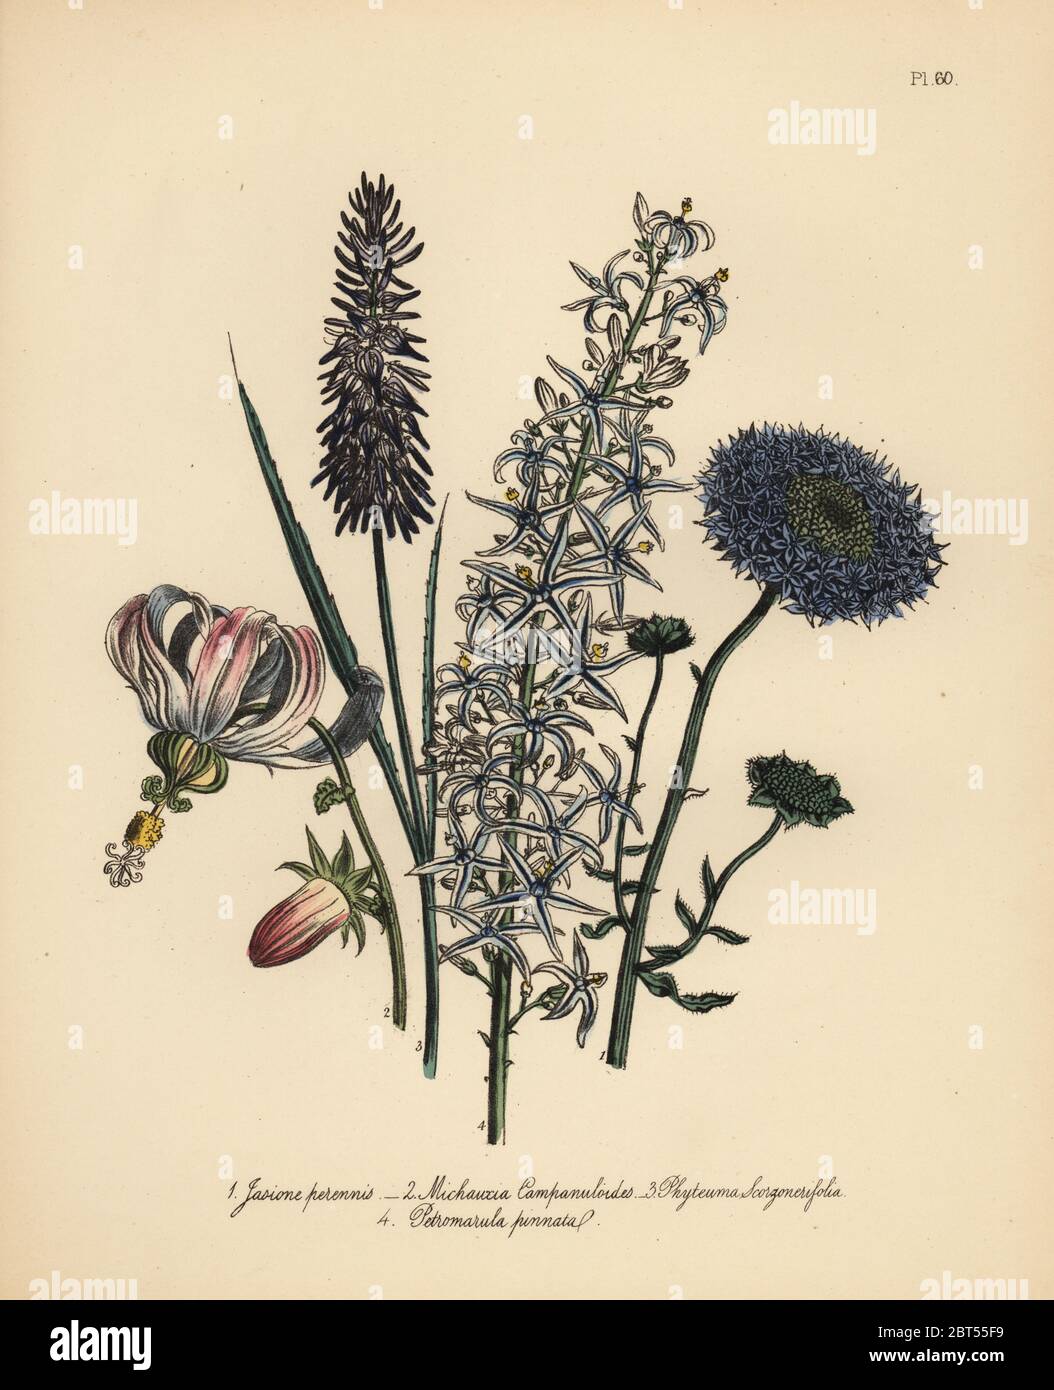 Perennial sheep scabious, Jasione perennis, campanula-like michauxia, Michauxia campanuloides, scorzonera-leaved rampion, Phyteuma scorzonerifolium, and winged candiot rampion, Petromarula pinnata. Handfinished chromolithograph by Henry Noel Humphreys after an illustration by Jane Loudon from Mrs. Jane Loudon's Ladies Flower Garden of Ornamental Perennials, William S. Orr, London, 1849. Stock Photo